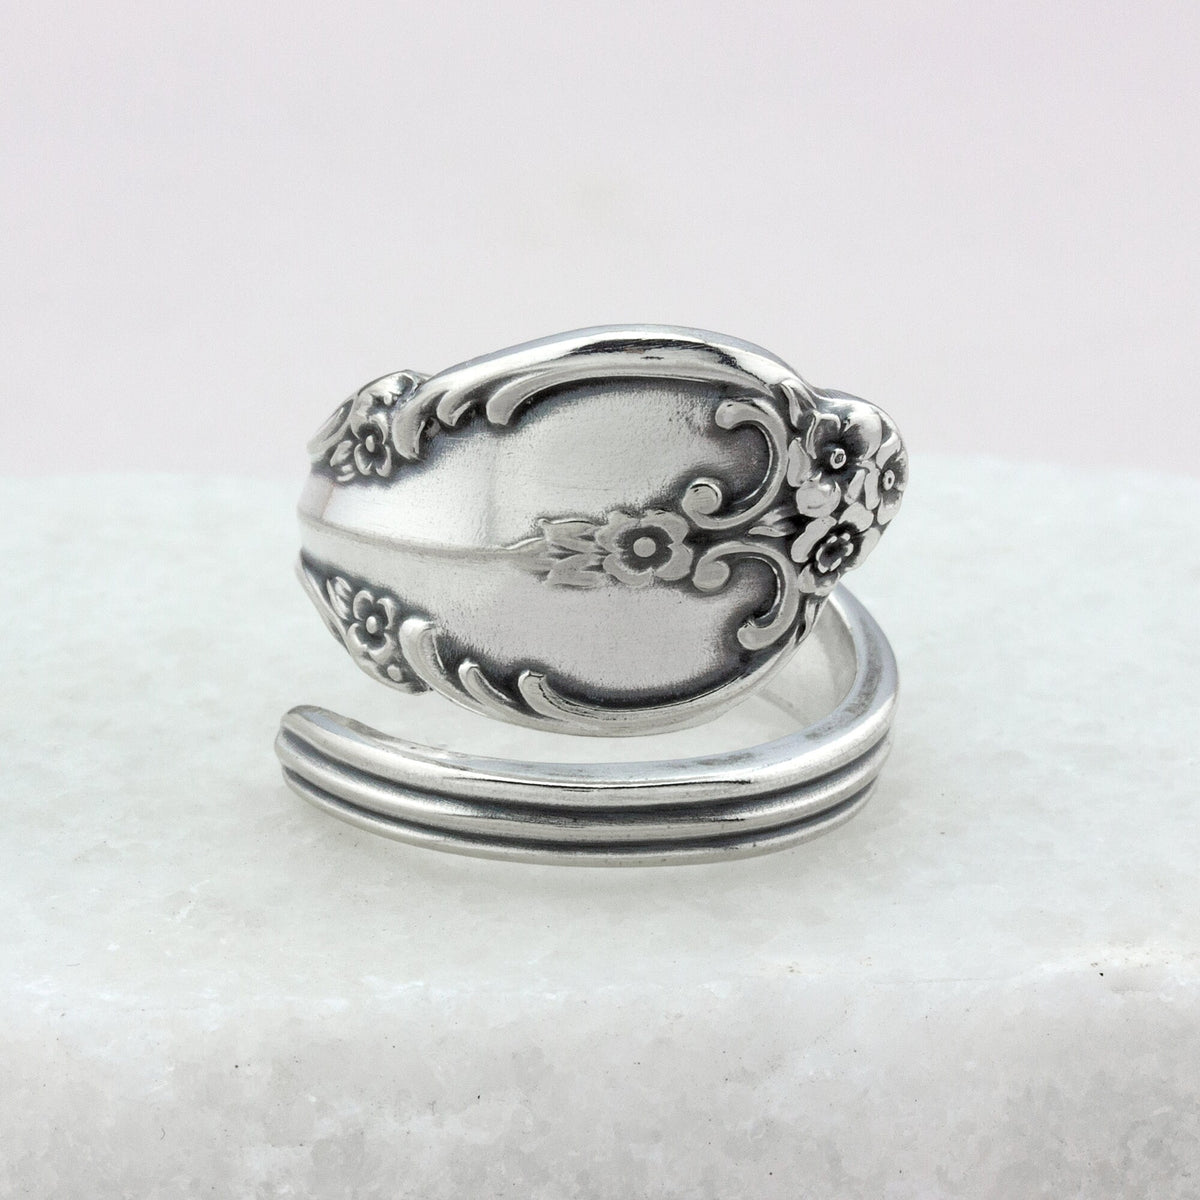 Antique Spoon Ring Jewelry Vintage Silverware Spoon Rings Handmade Authentic Silverware Jewelry 1962 Southern Splendor Mothers Day Gift